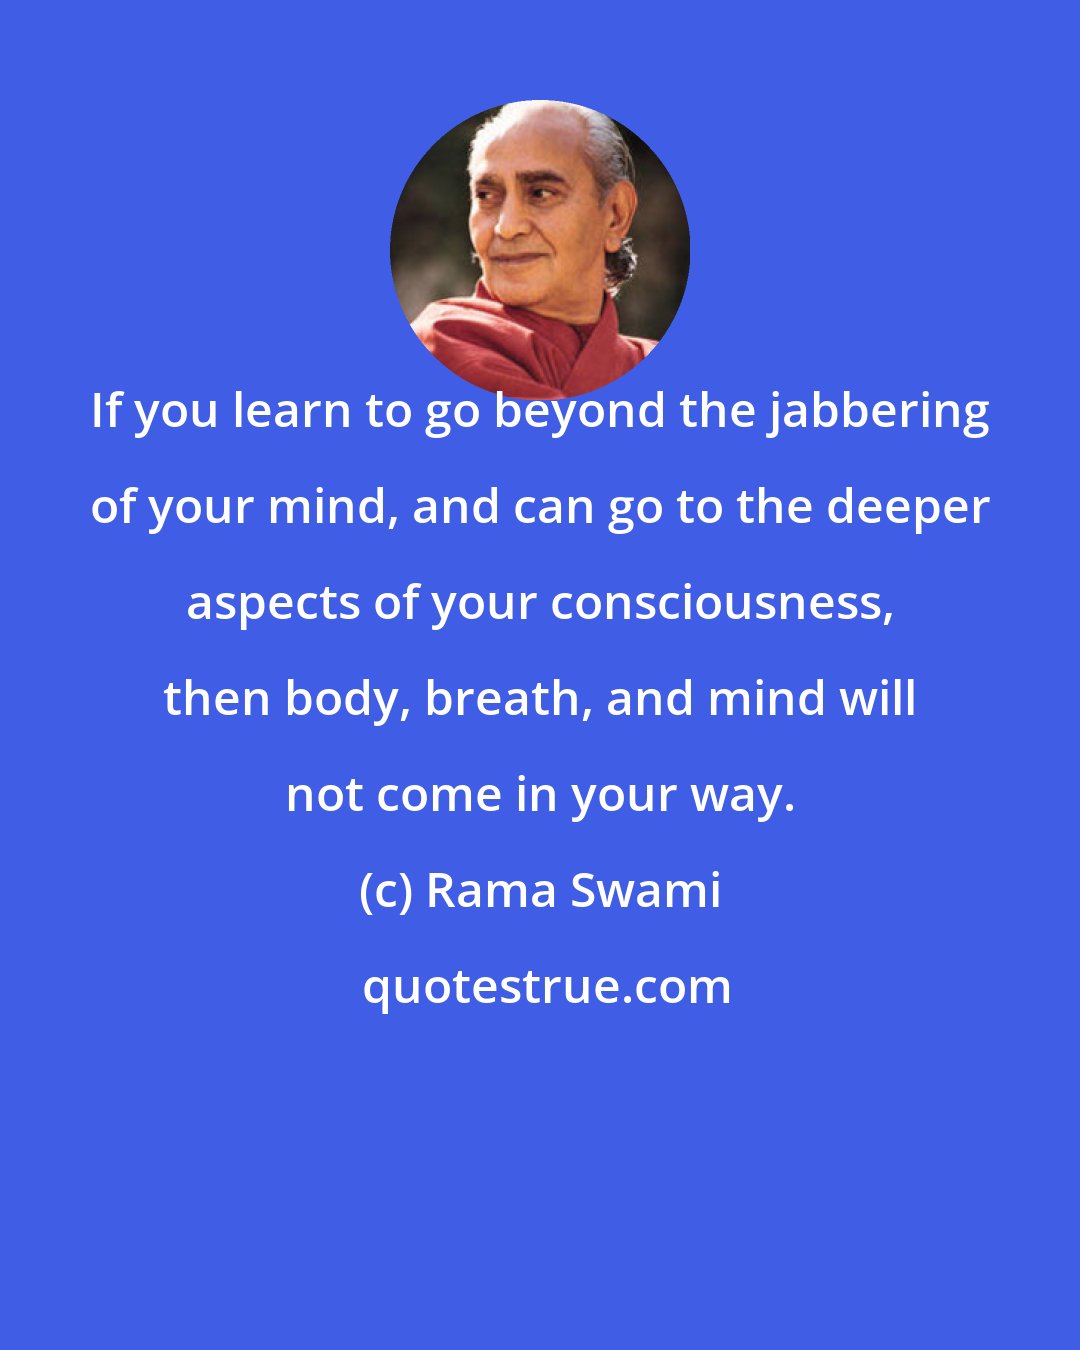 Rama Swami: If you learn to go beyond the jabbering of your mind, and can go to the deeper aspects of your consciousness, then body, breath, and mind will not come in your way.